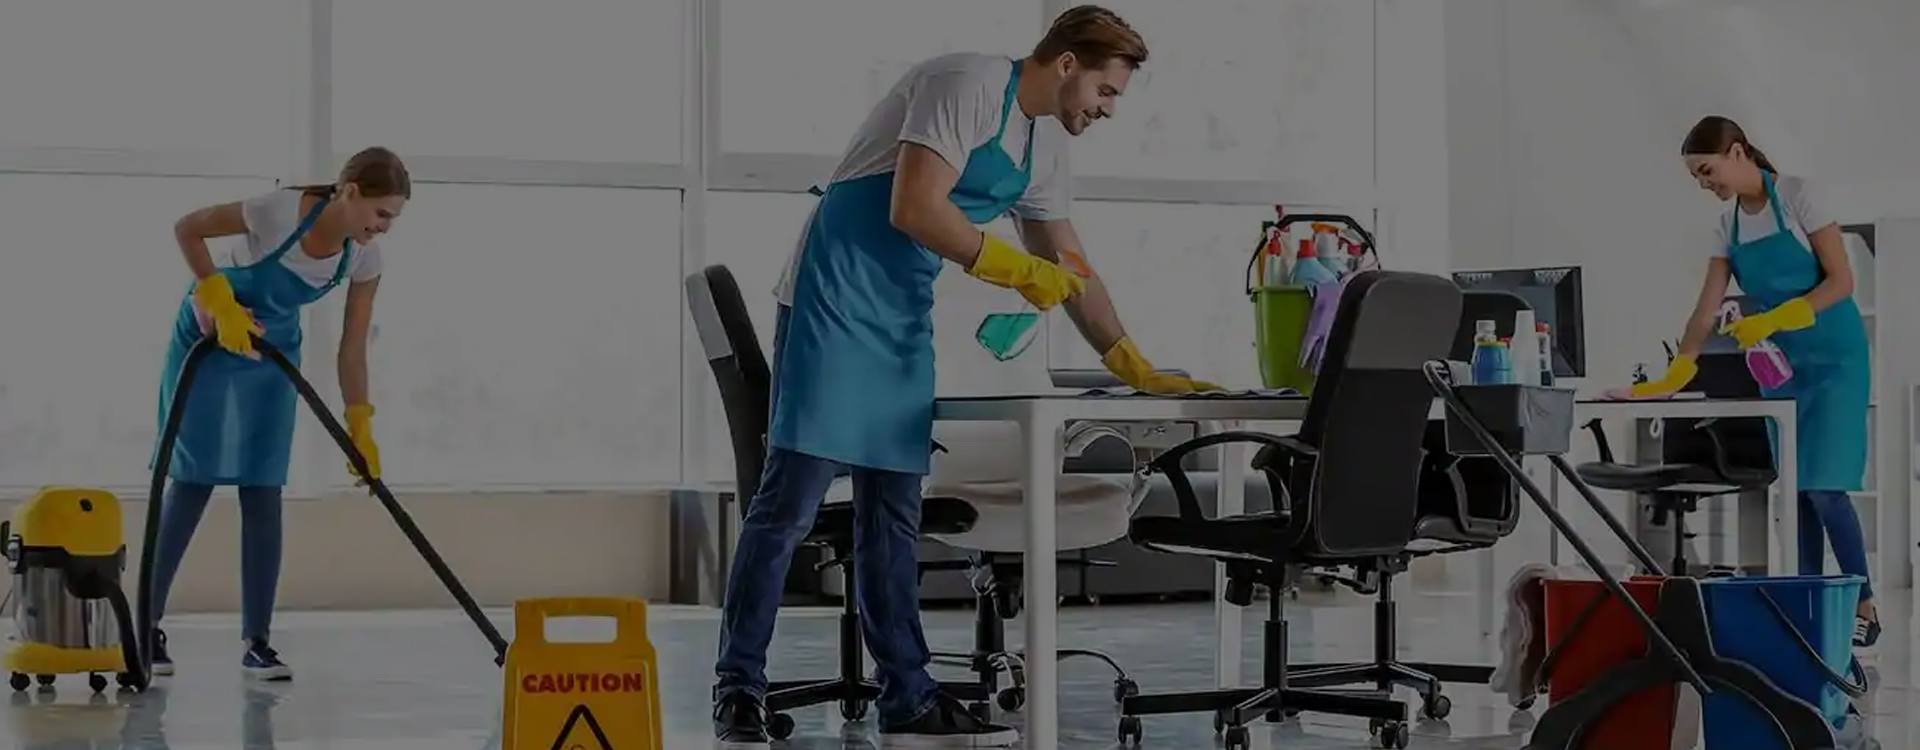 Office Cleaning Services Company Melbourne, Office Cleaners near me